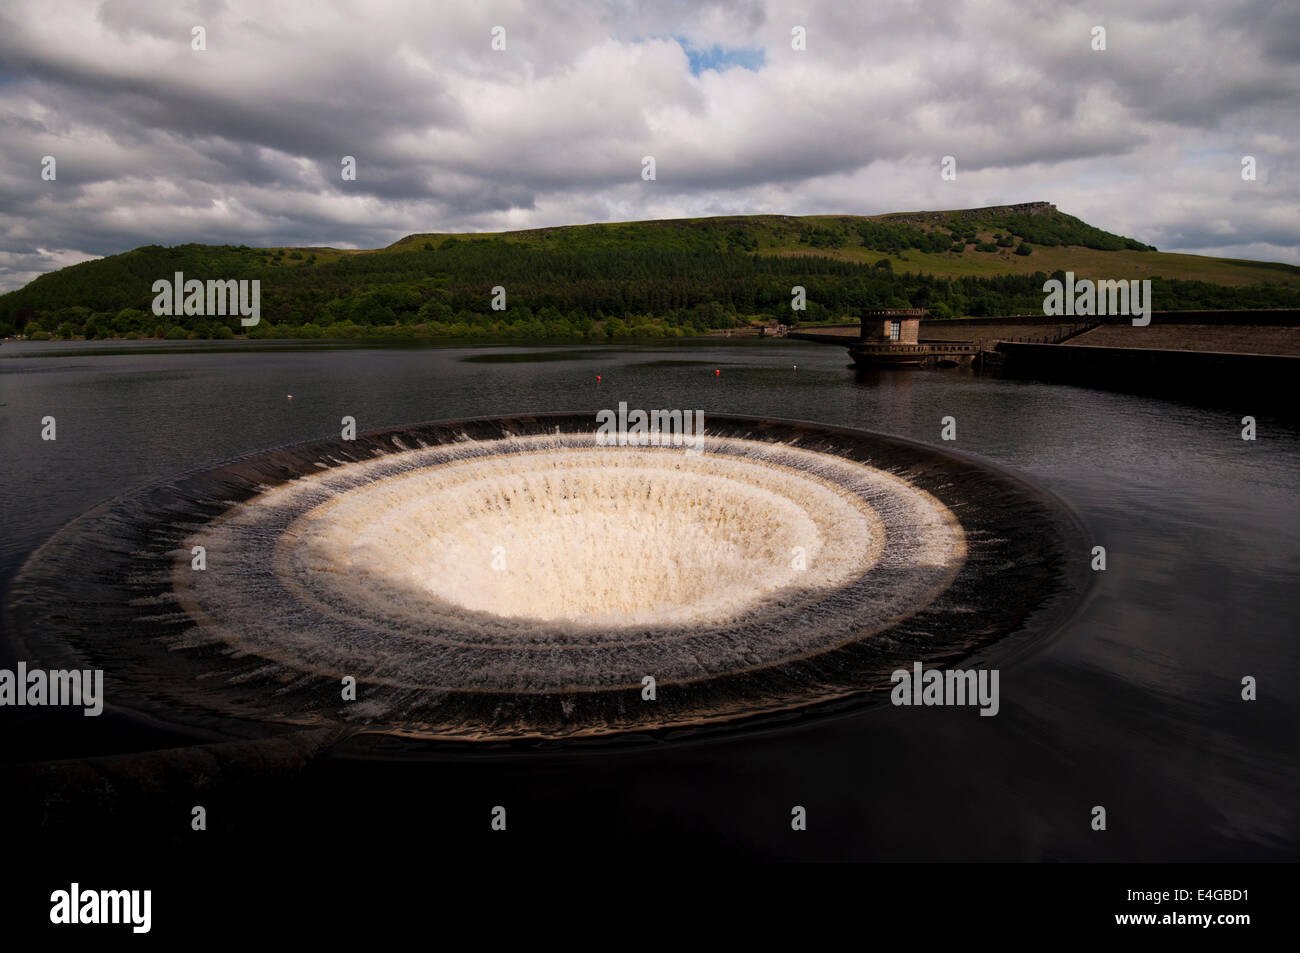 Overflow or Bellmouth, Ladybower Reservoir in the Peak District National Park. Stock Photo